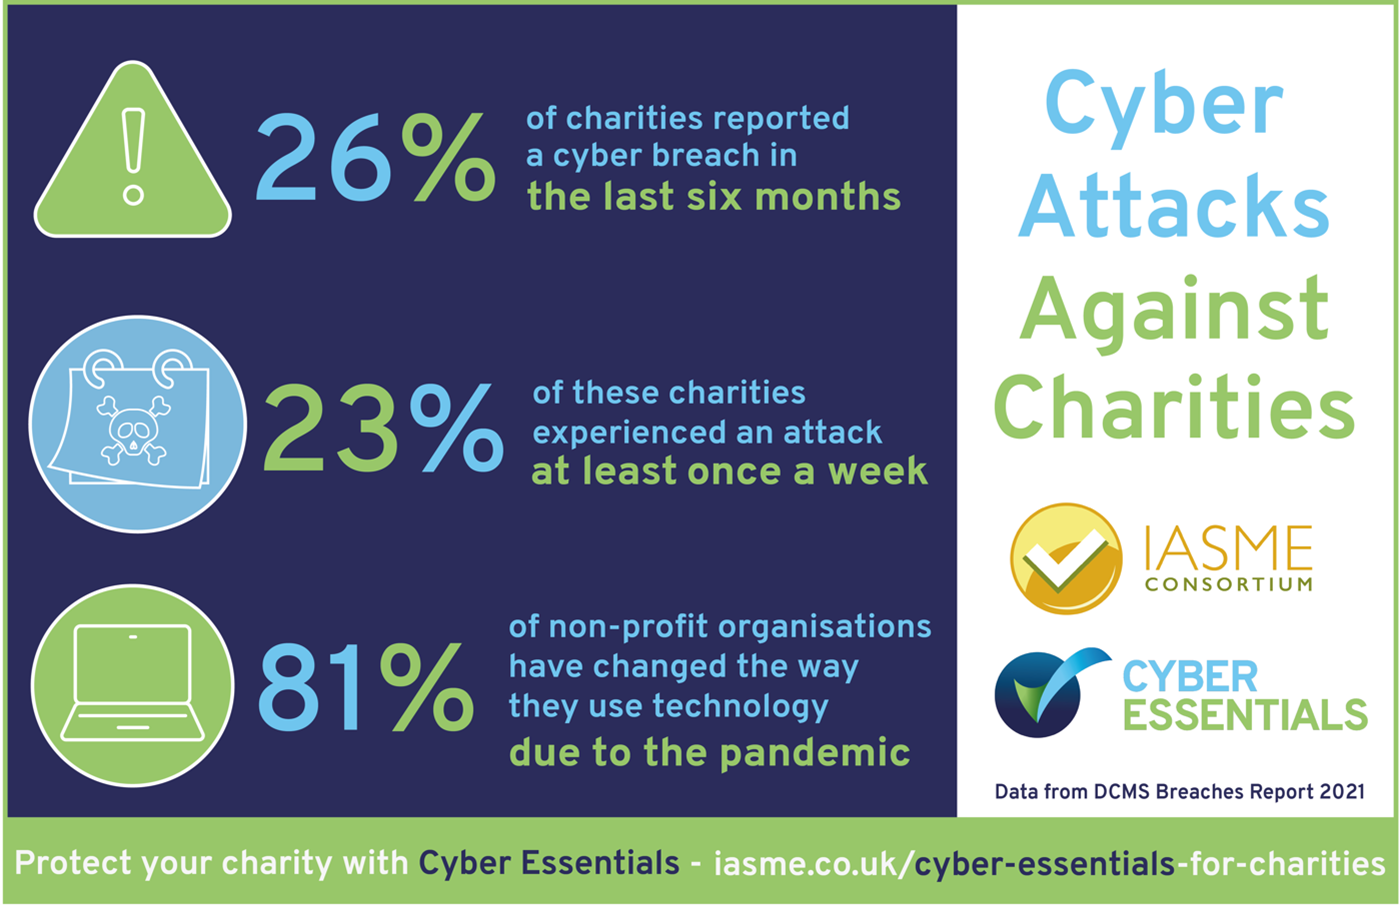 Cyber Security Challenges for the Charity Sector – how can Cyber Essentials help?